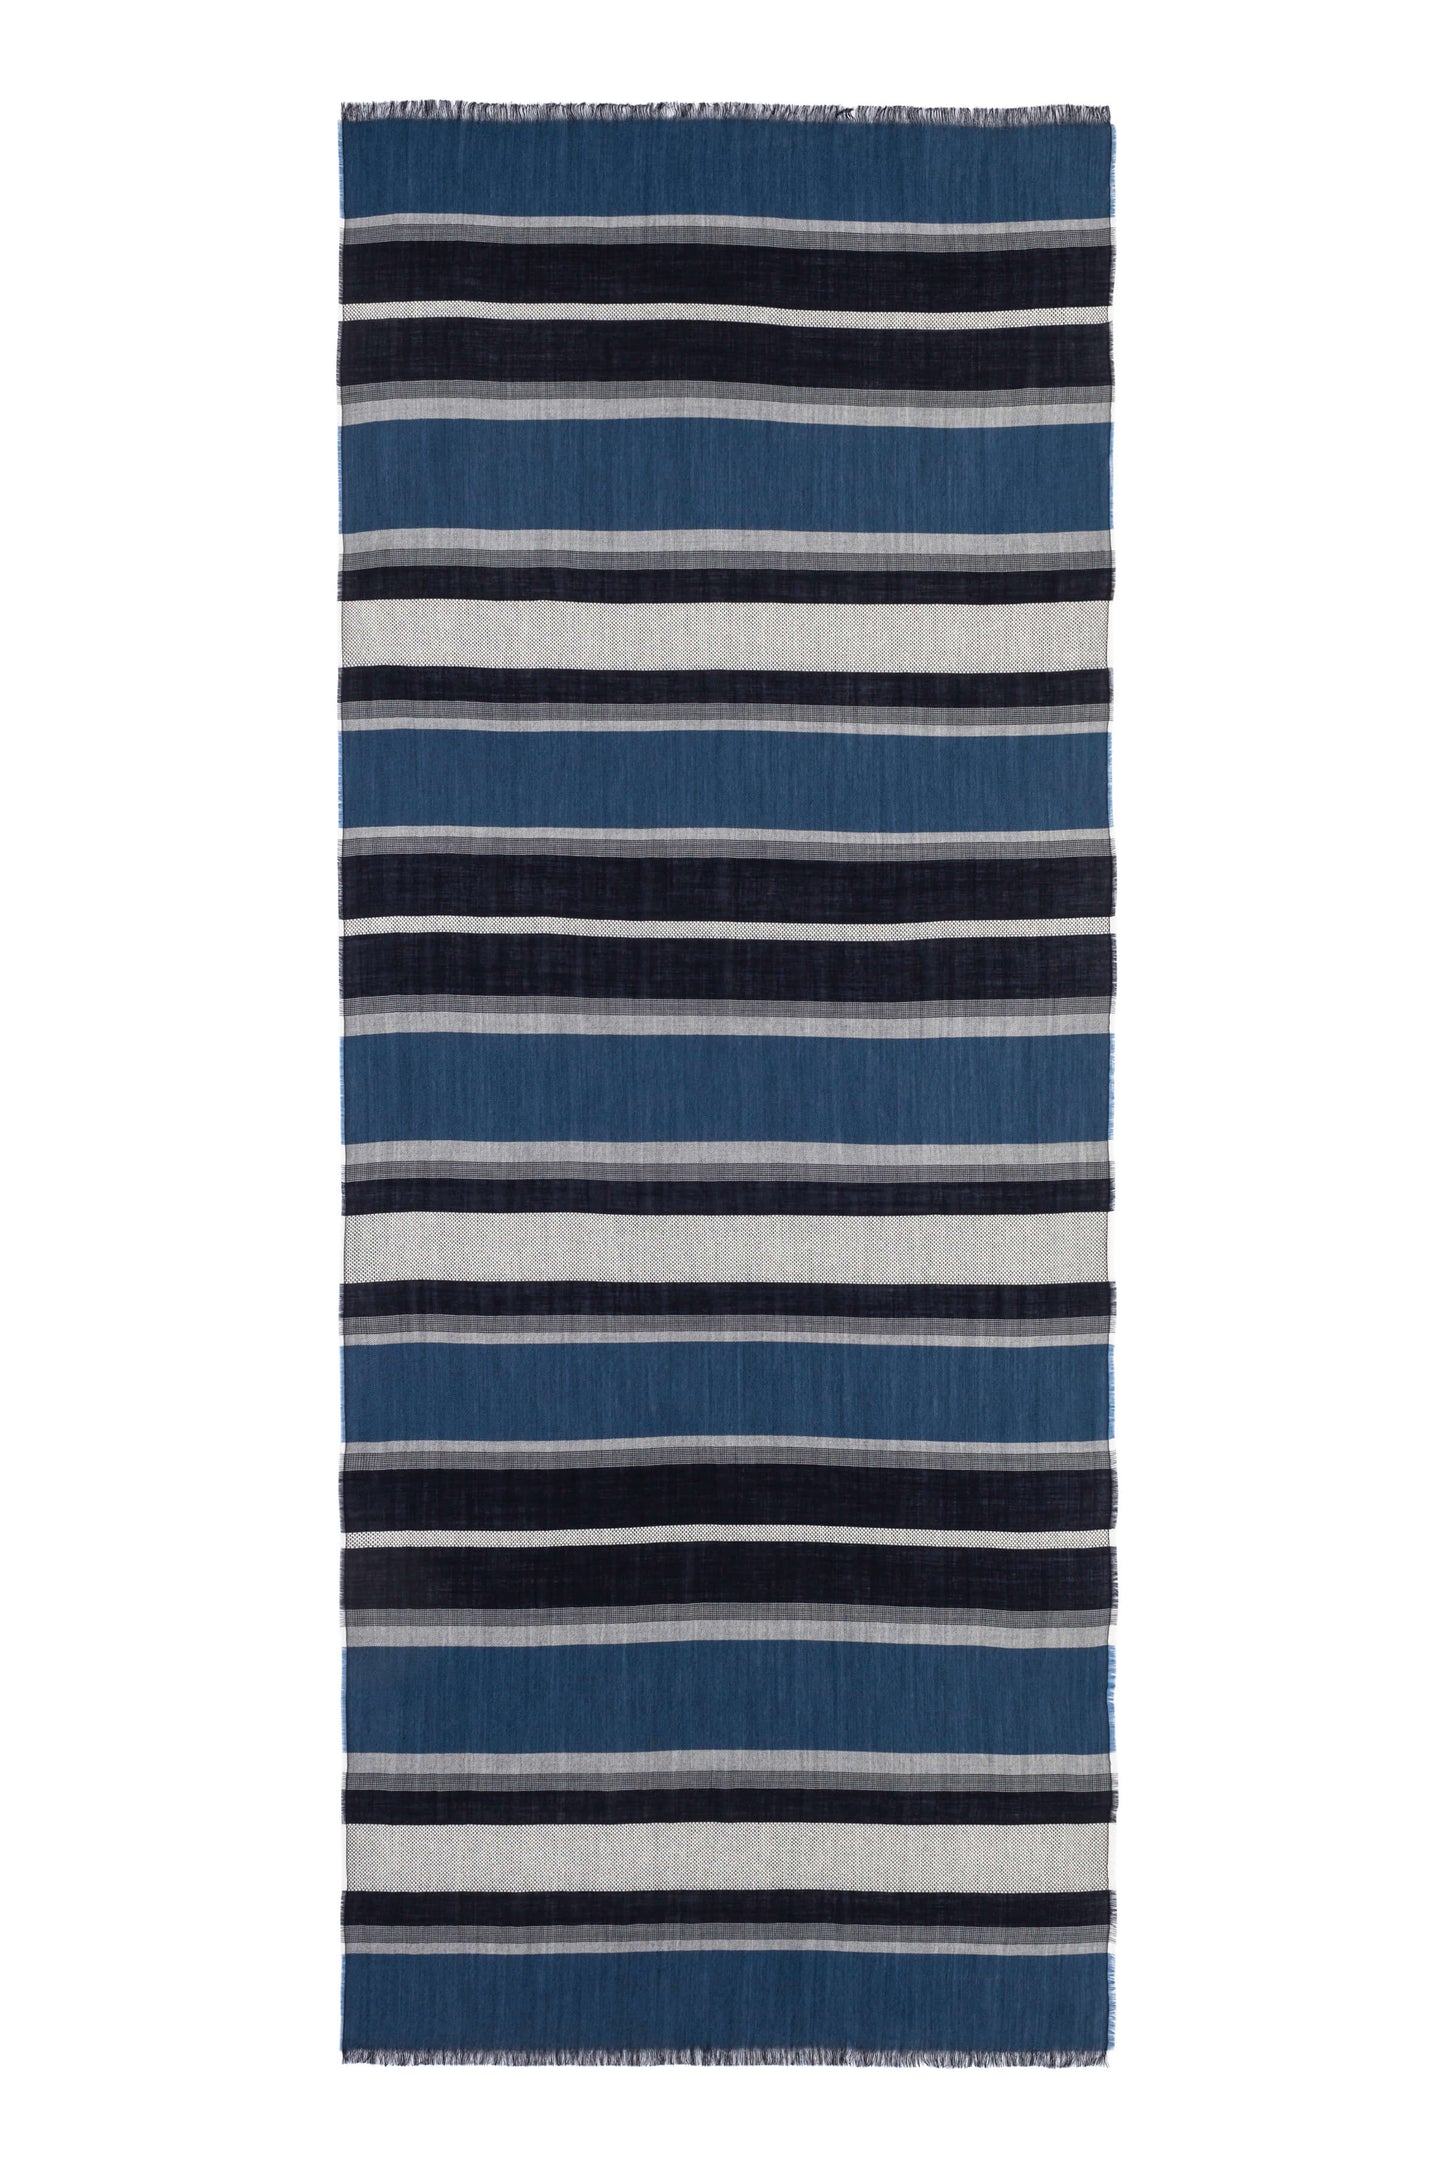 Johnstons of Elgin SS24 Accessories Navy Tissue Textured Stripe Scarf WB002483RU7402ONE